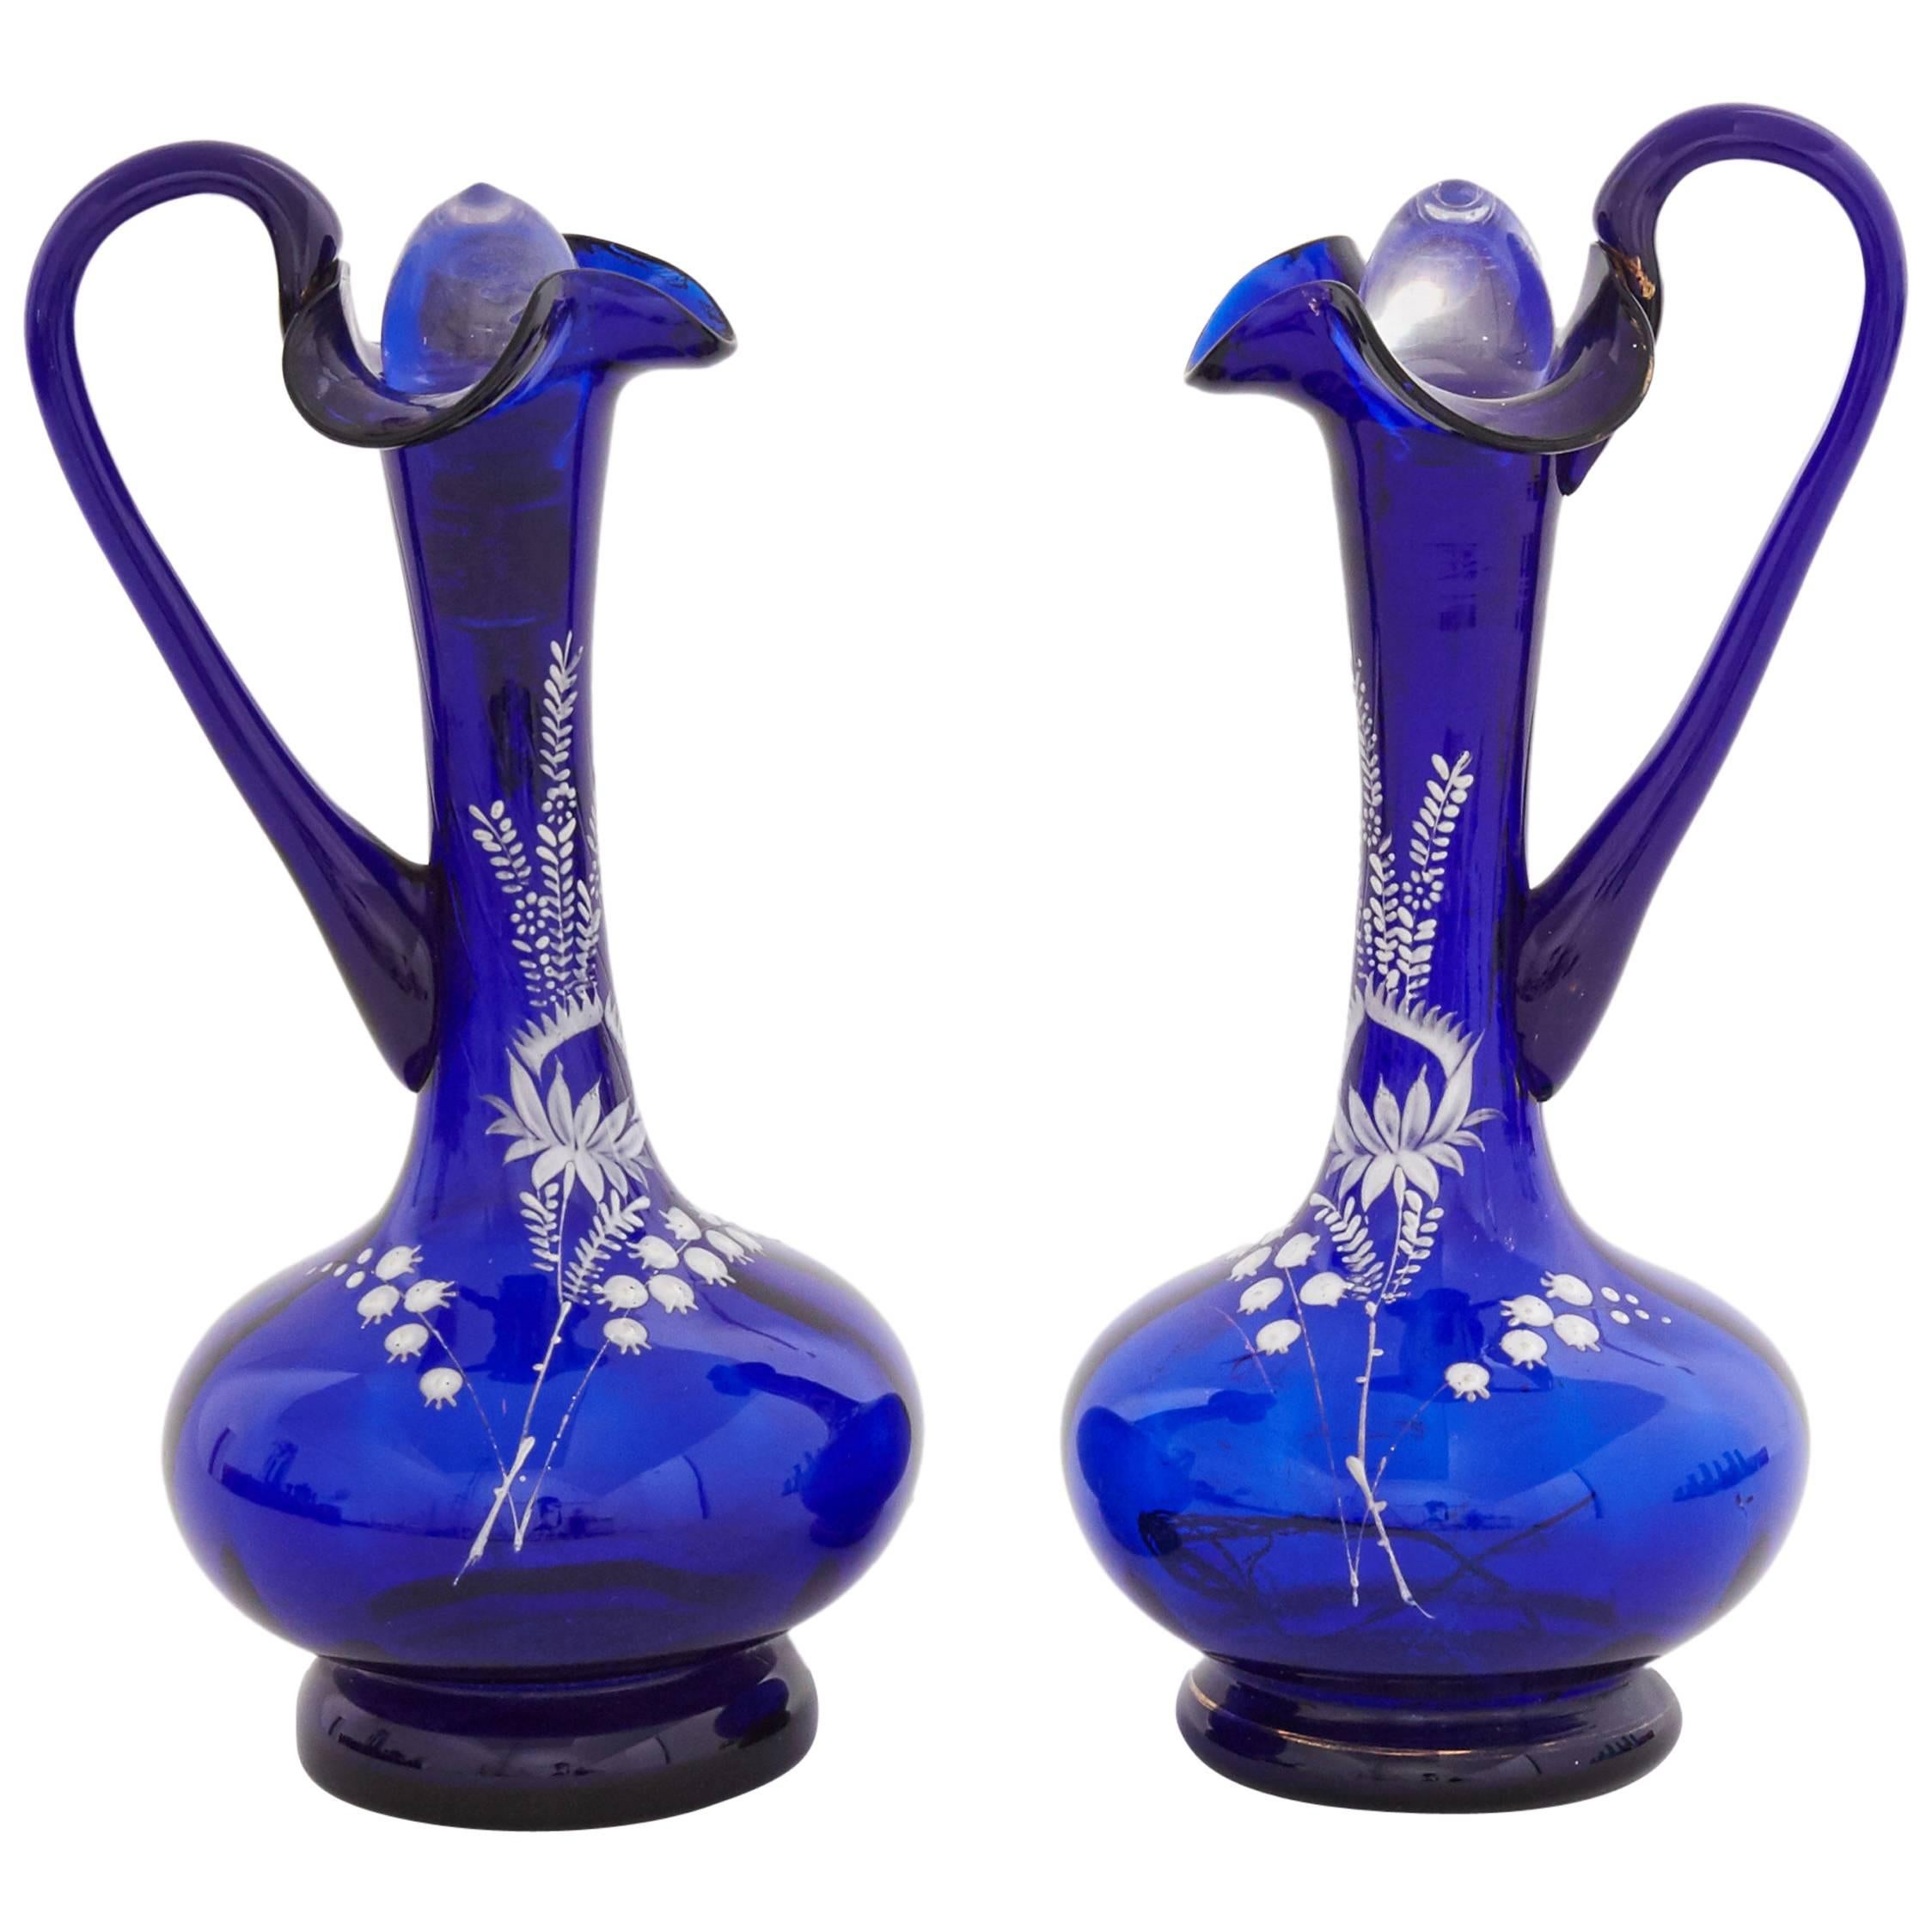 Vintage Enameled Blue Glass Decanters with White Floral Motif